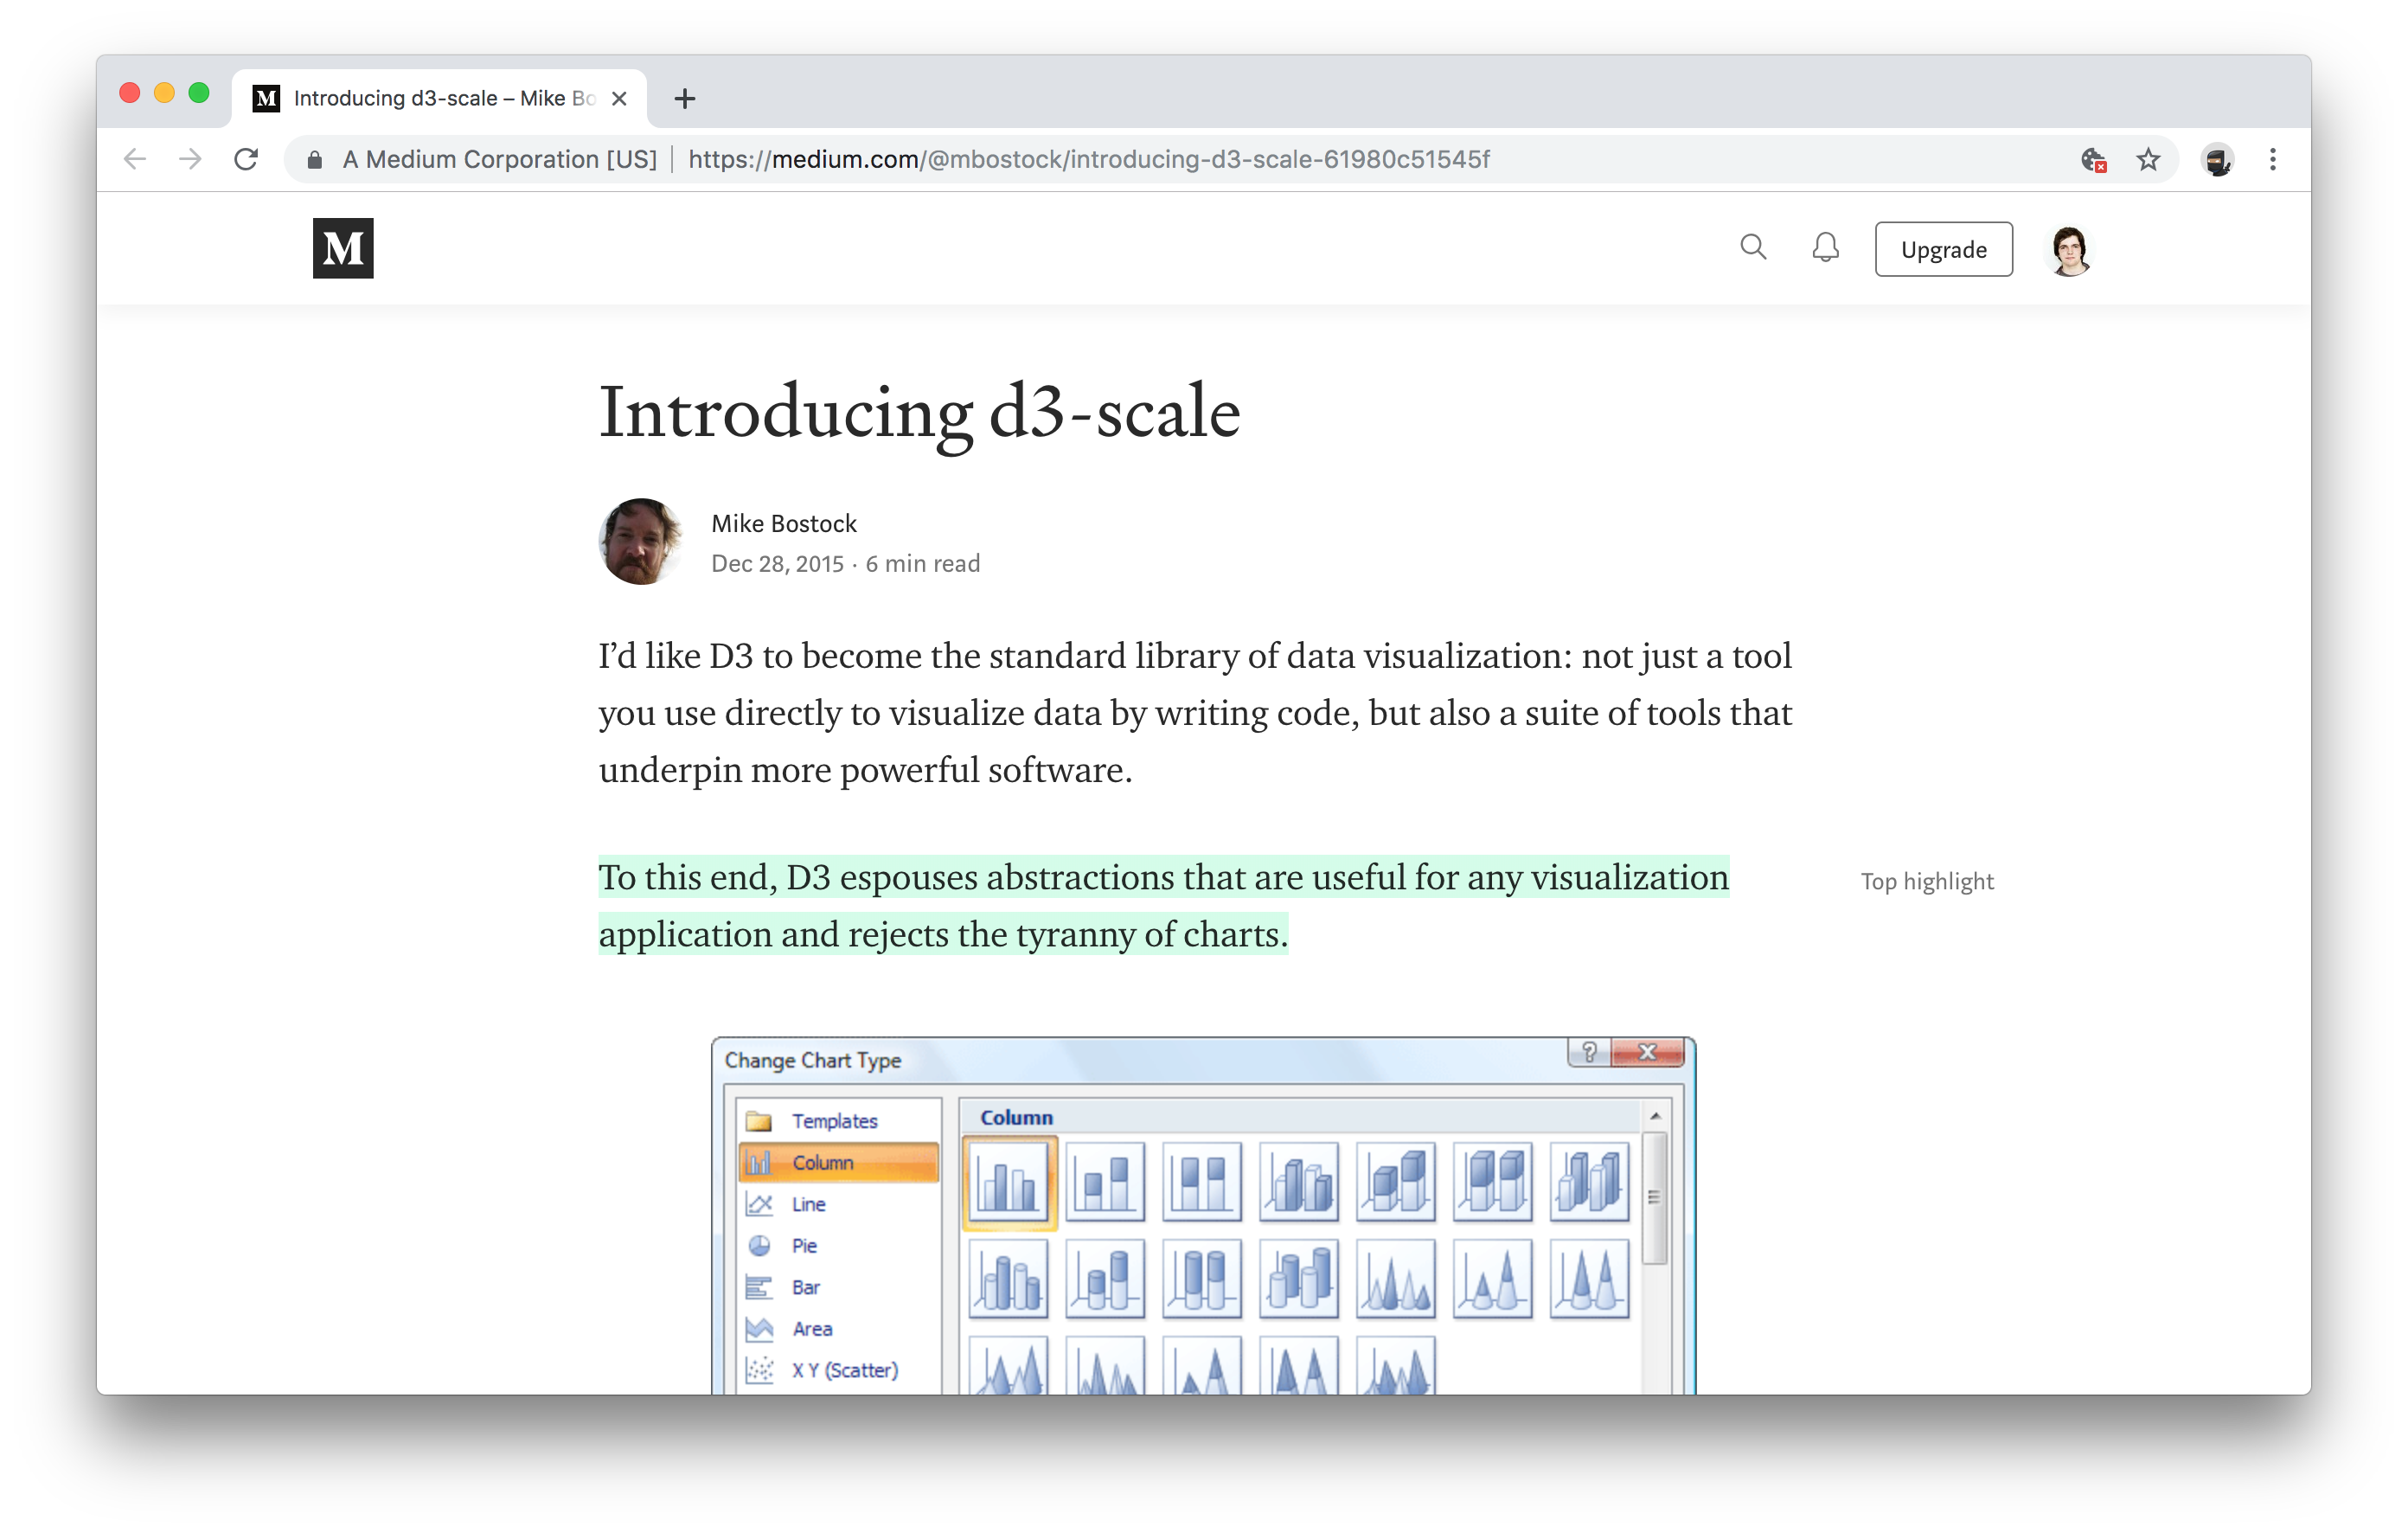 Introducing D3 scale article by mike Bostock